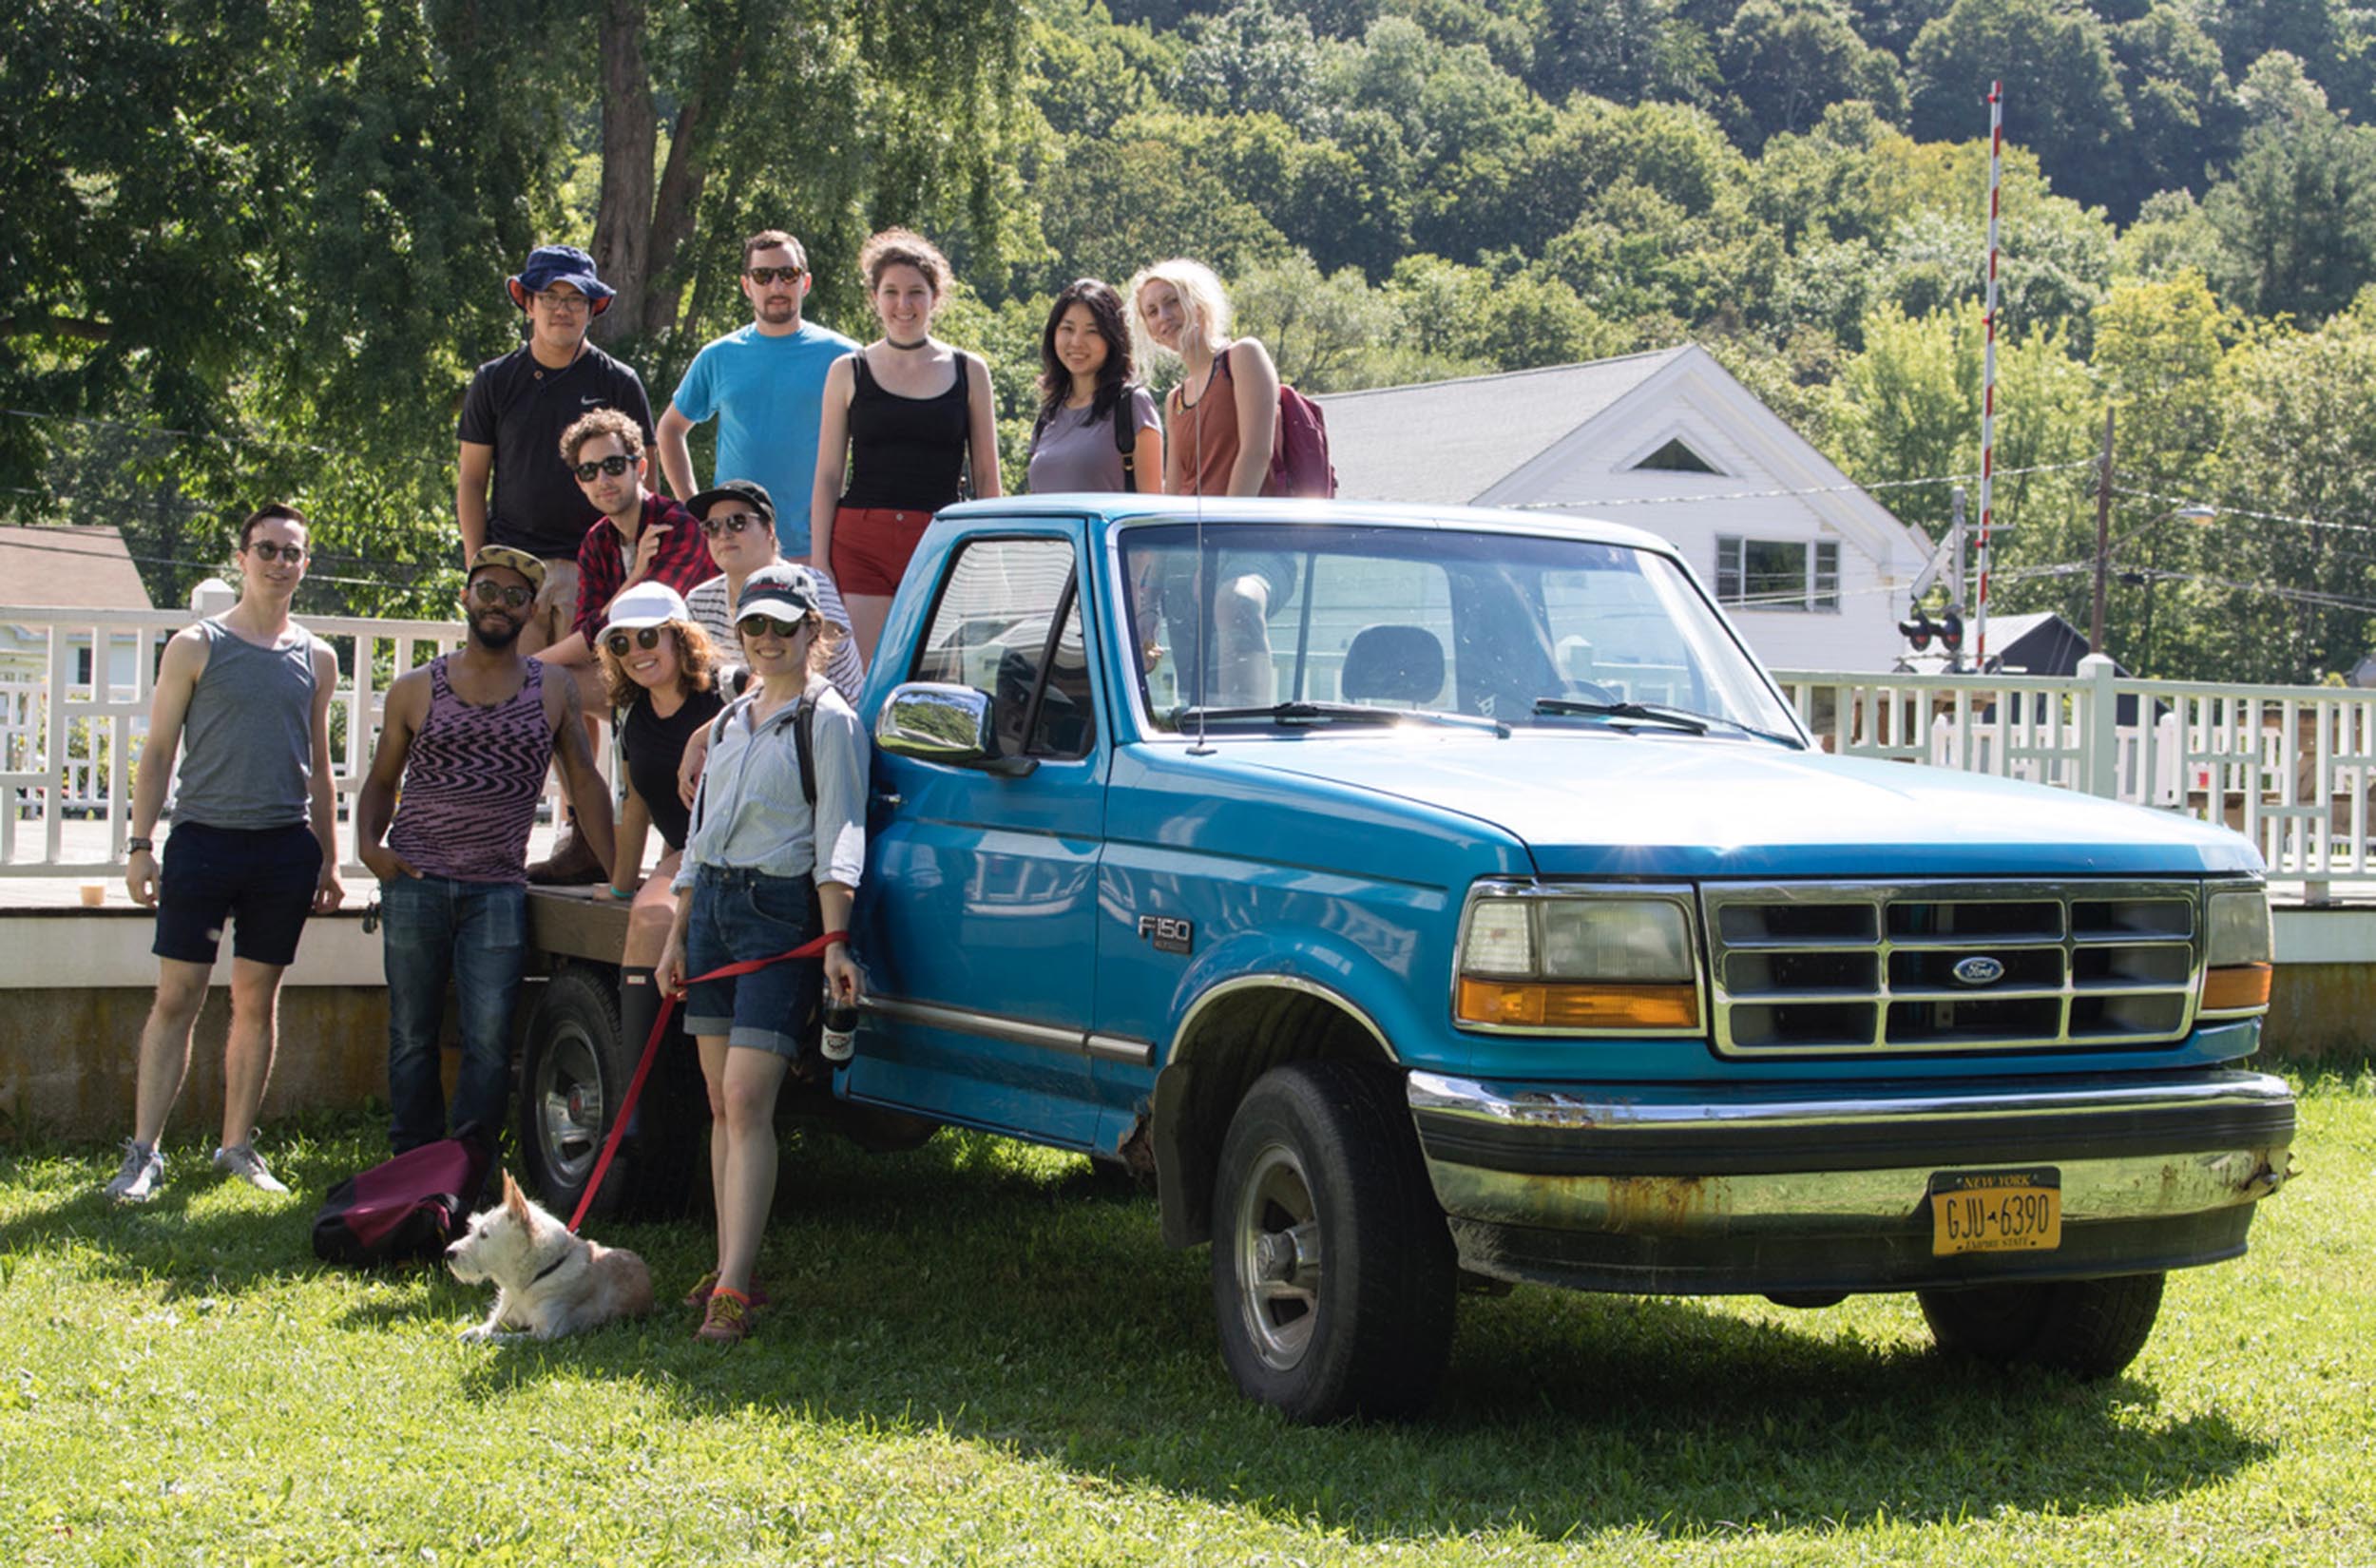 Several people who are participants in a retreat pose next to a pickup truck in the summer sunshine.